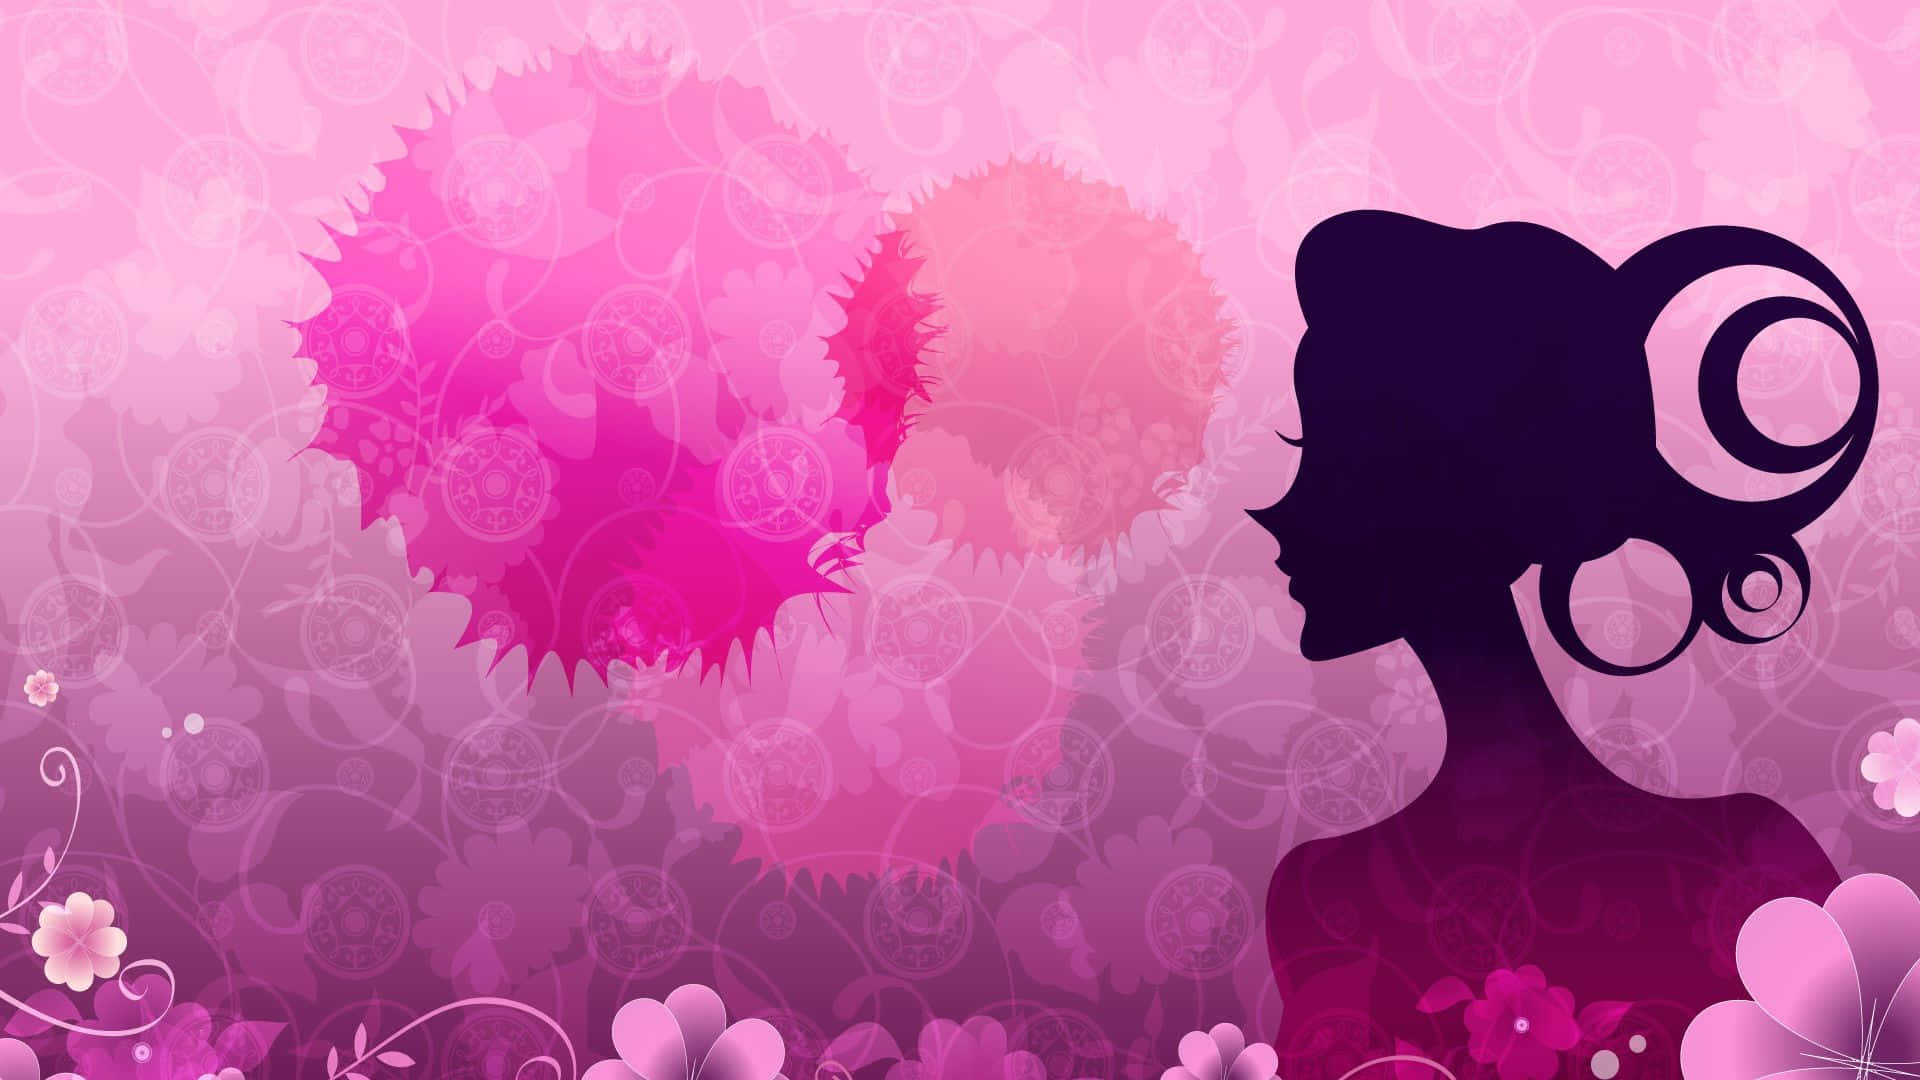 A Woman's Silhouette Is Shown Against A Pink Background